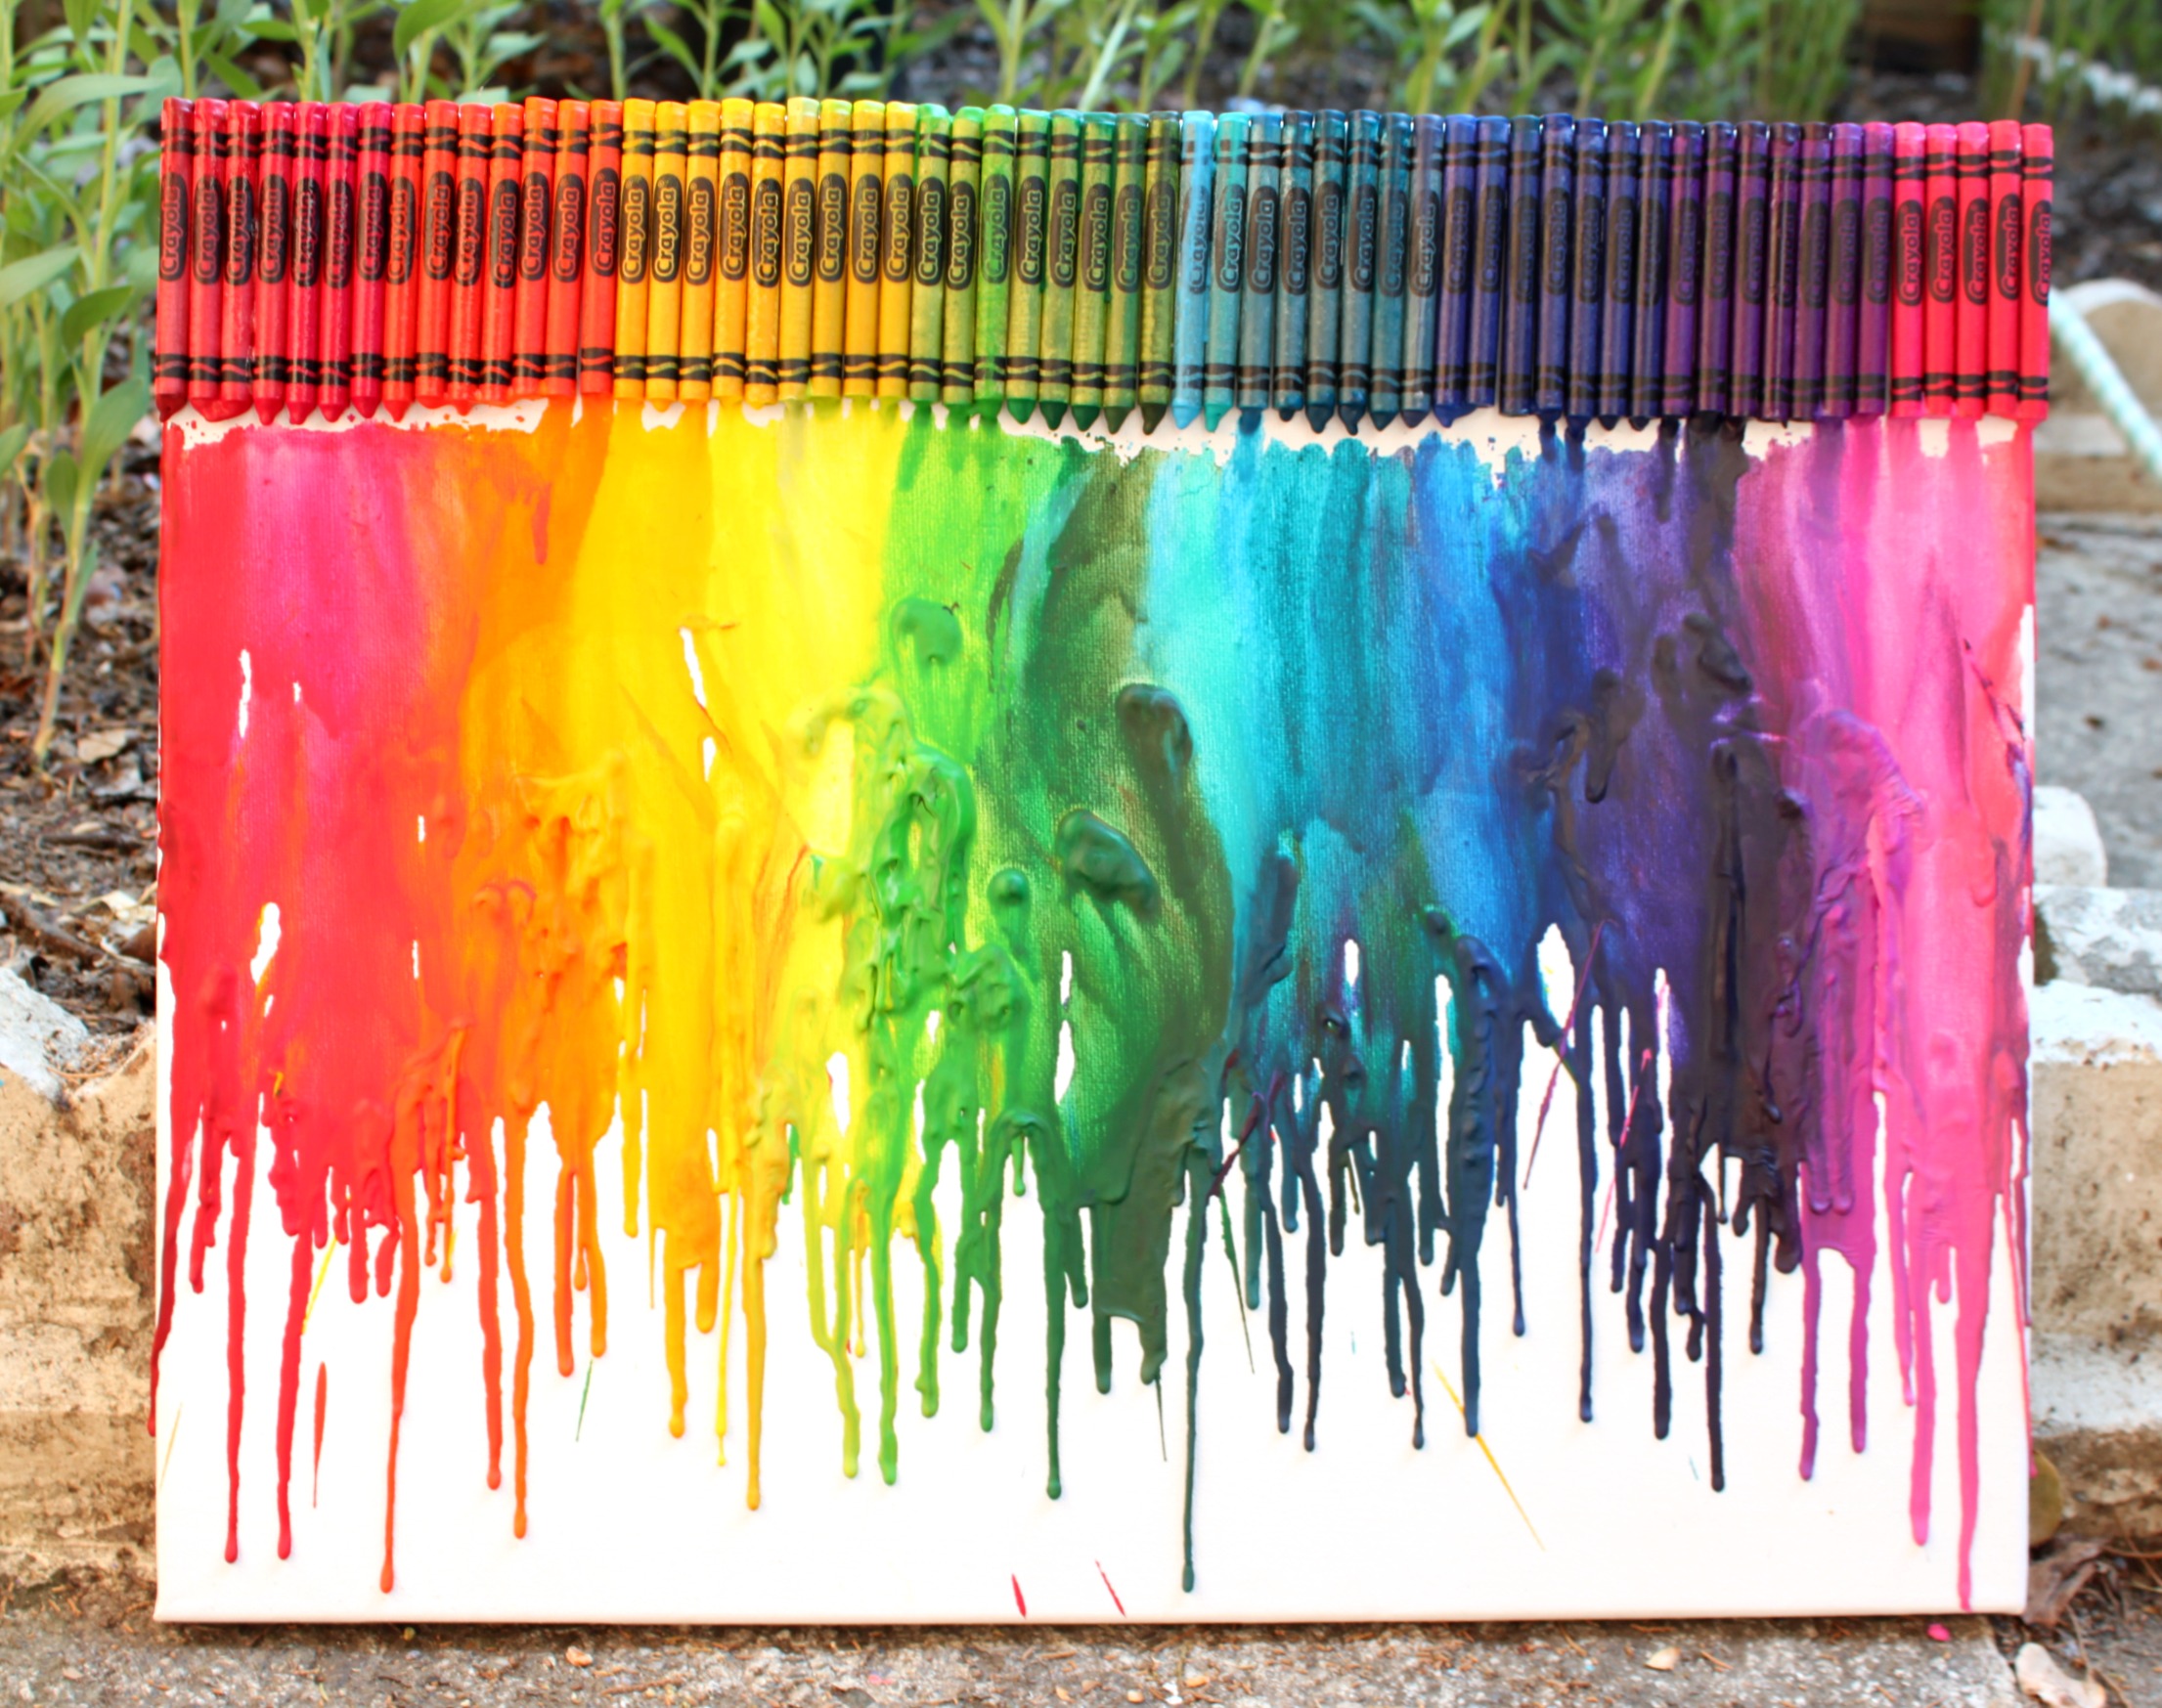 melted crayon art ideas with animals